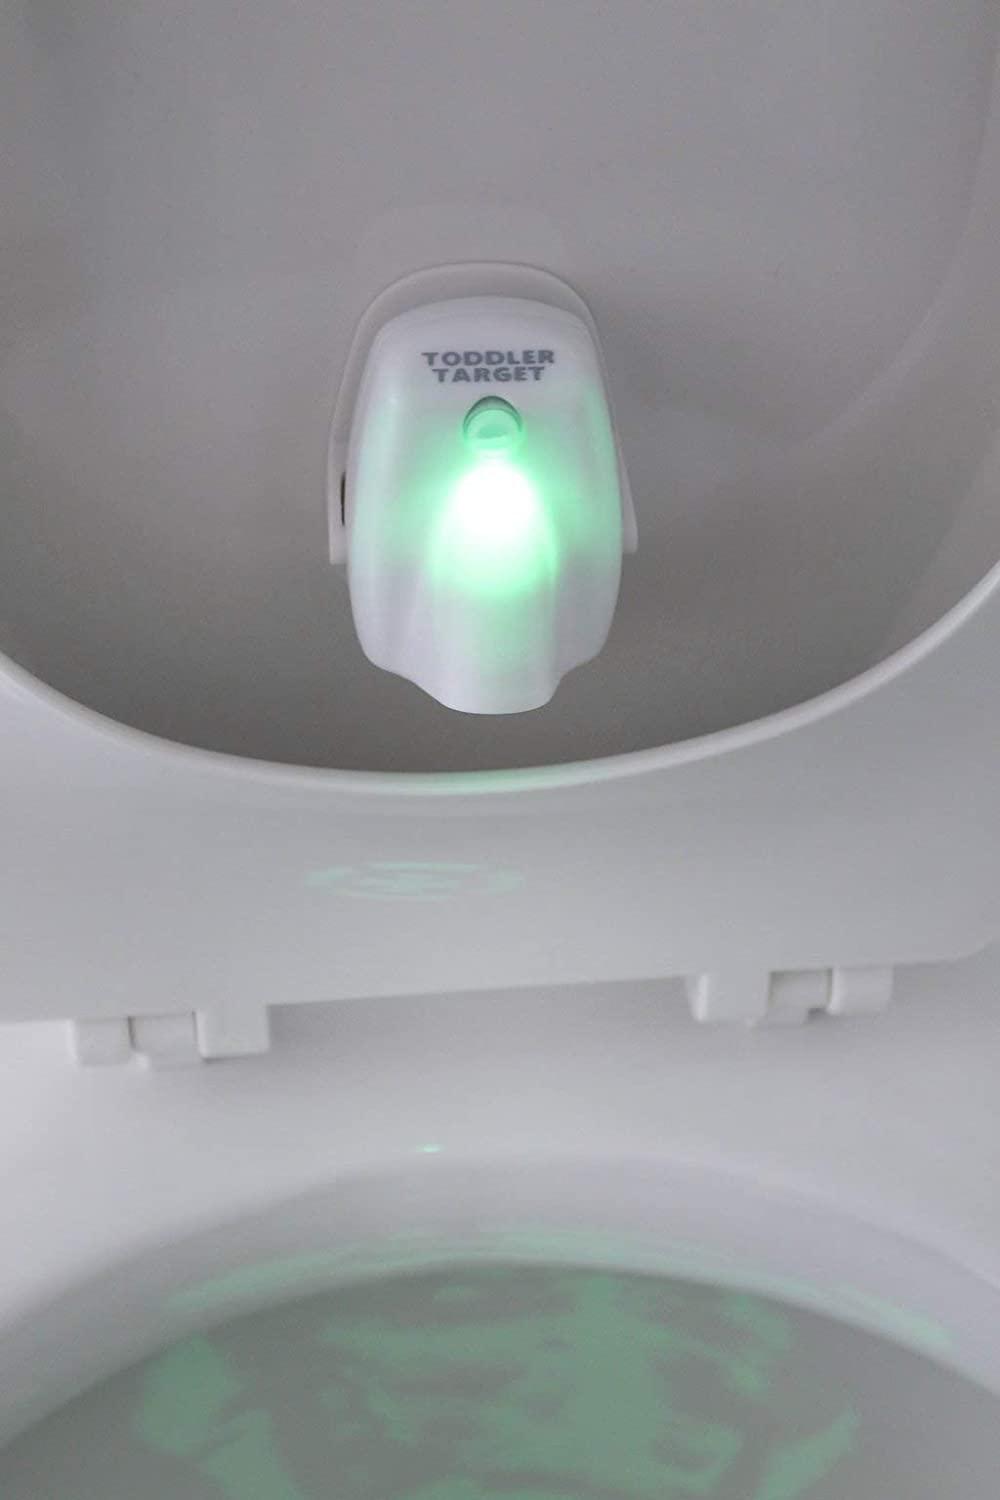 This Bullseye Target Light Helps Potty Train Your Toddler (or Man)